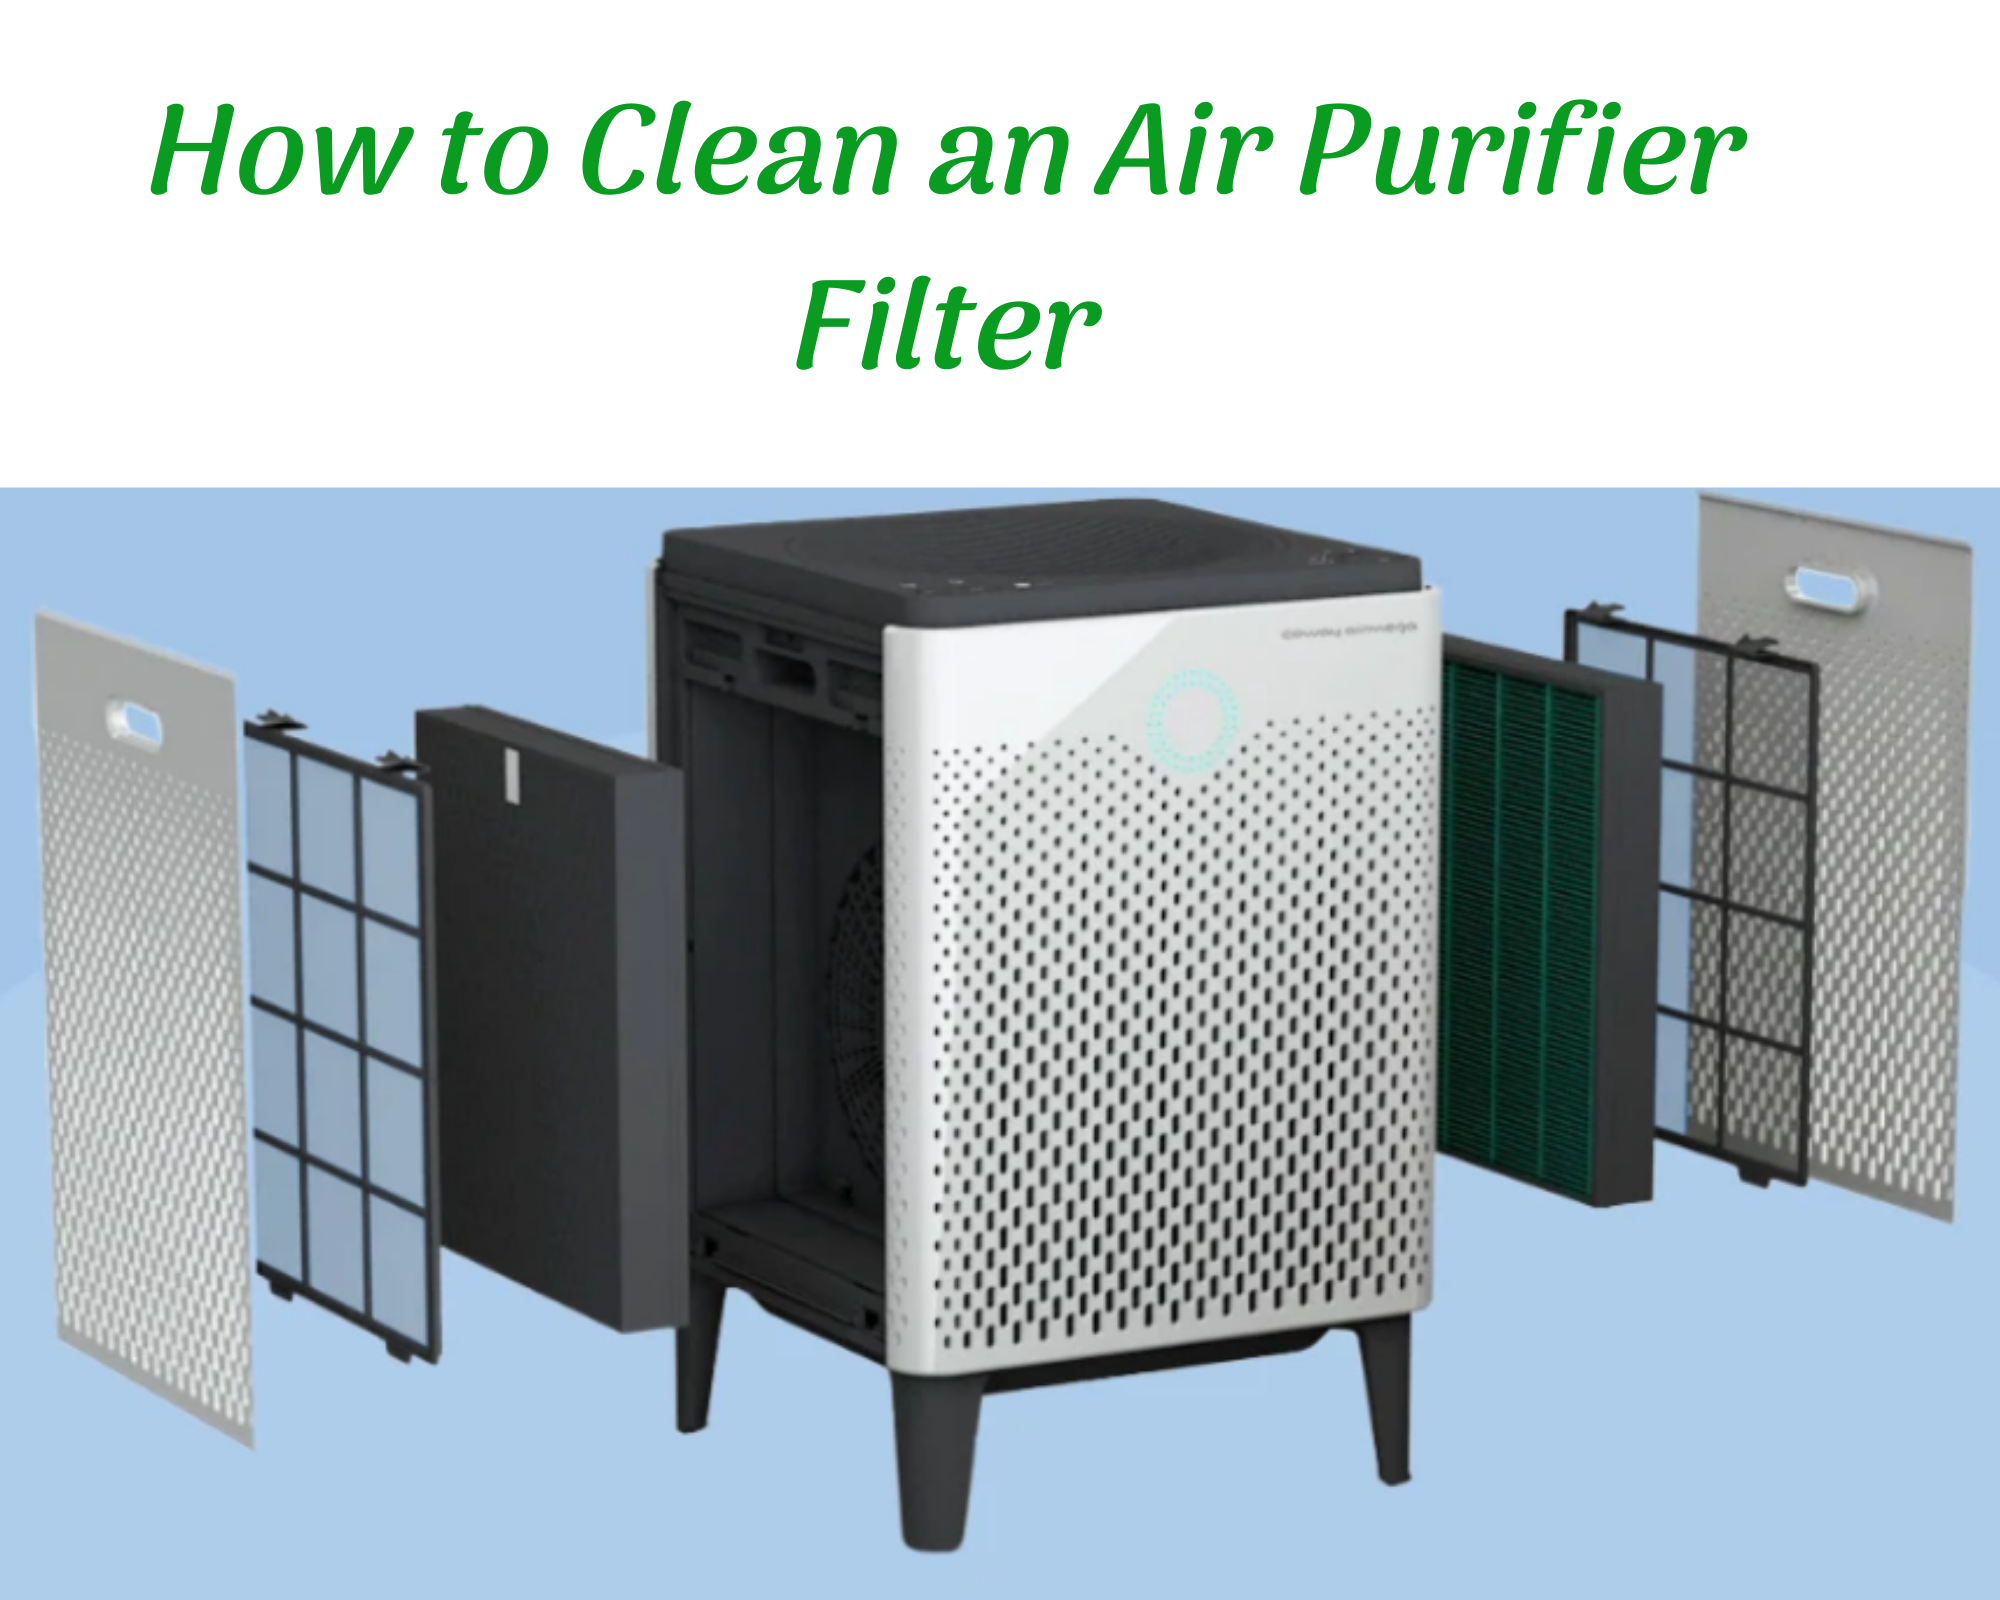 How to clean air purifier filters